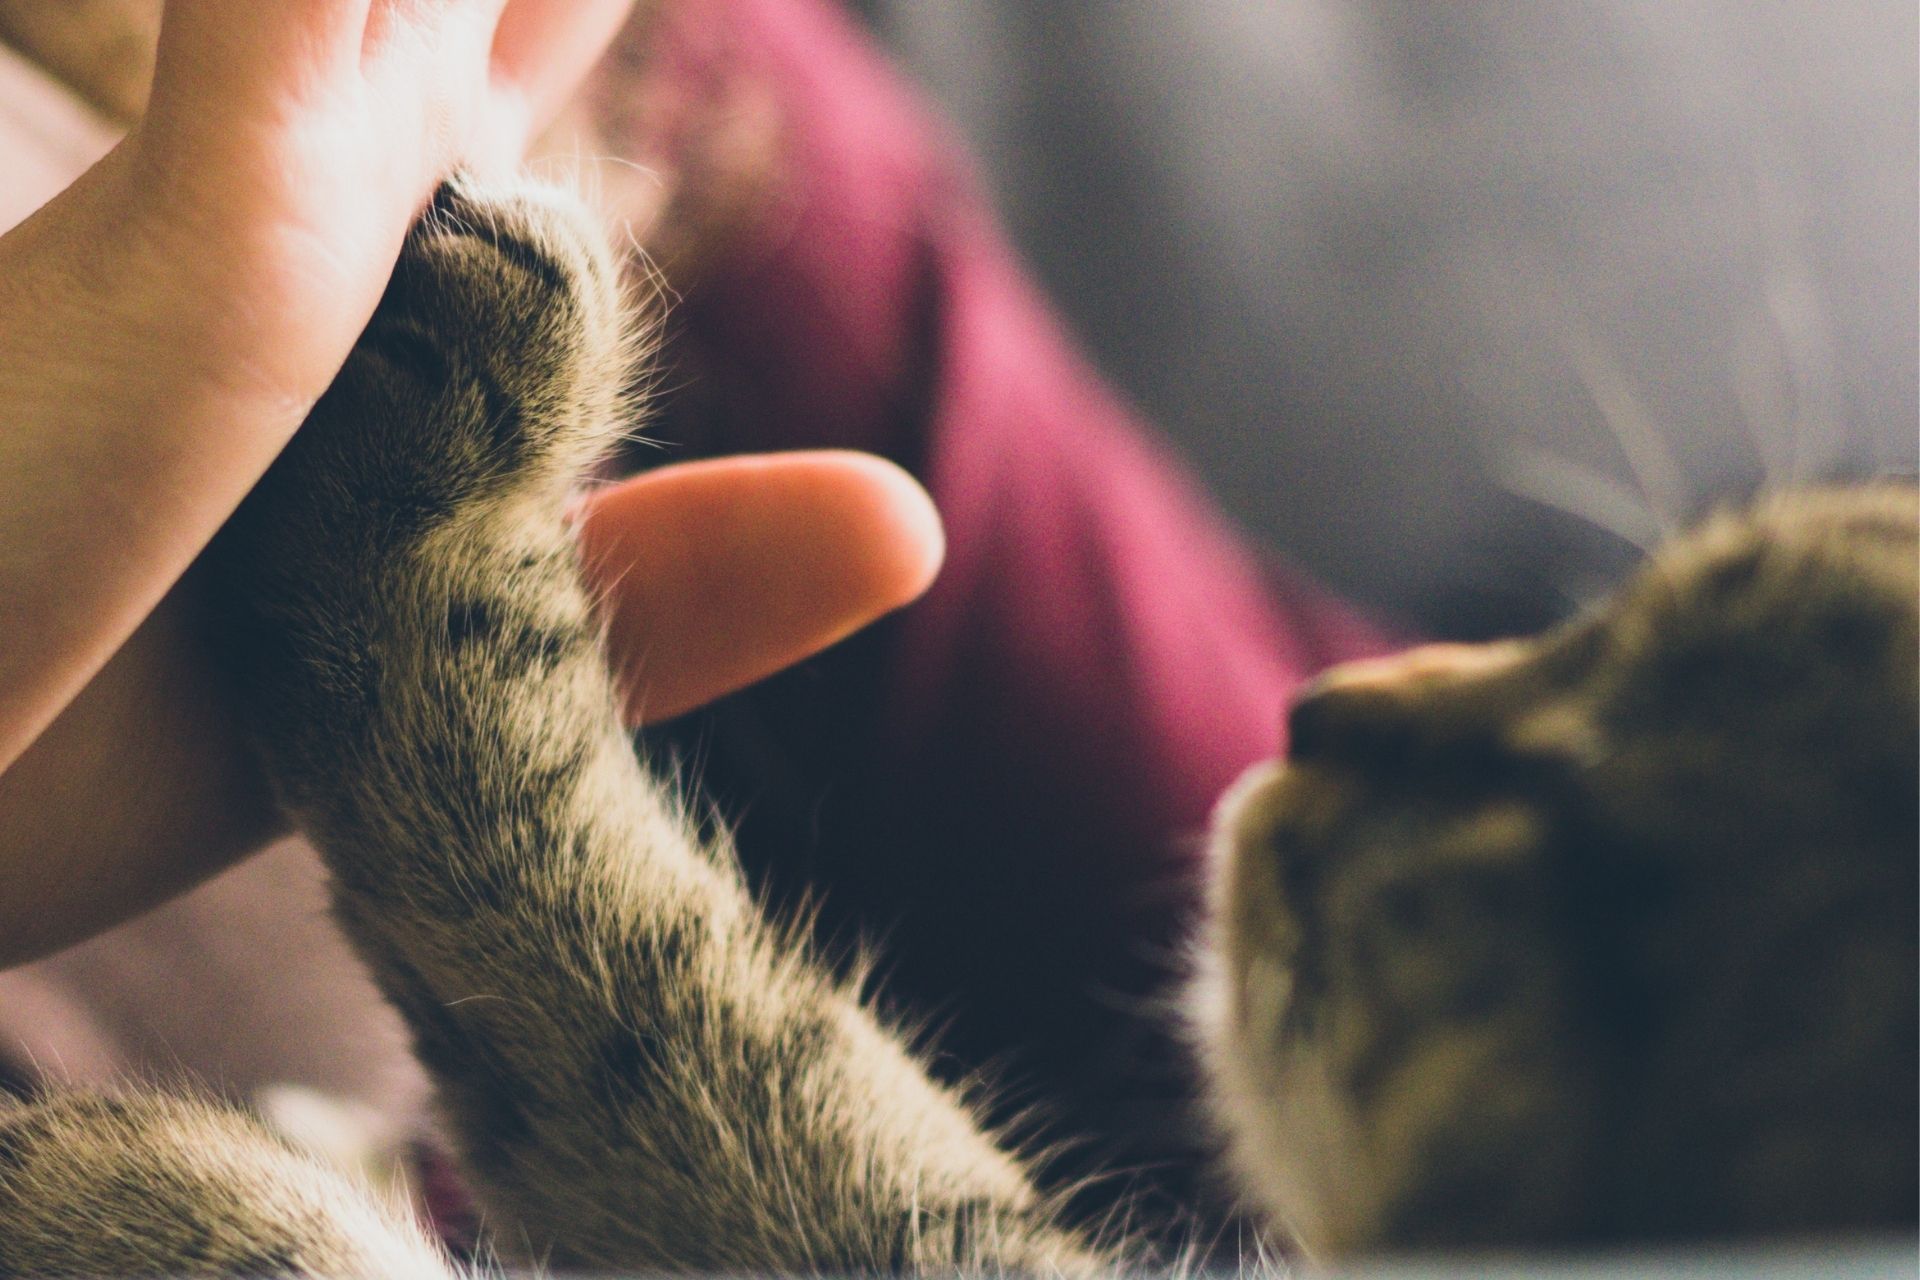 cat putting paw on persons hand